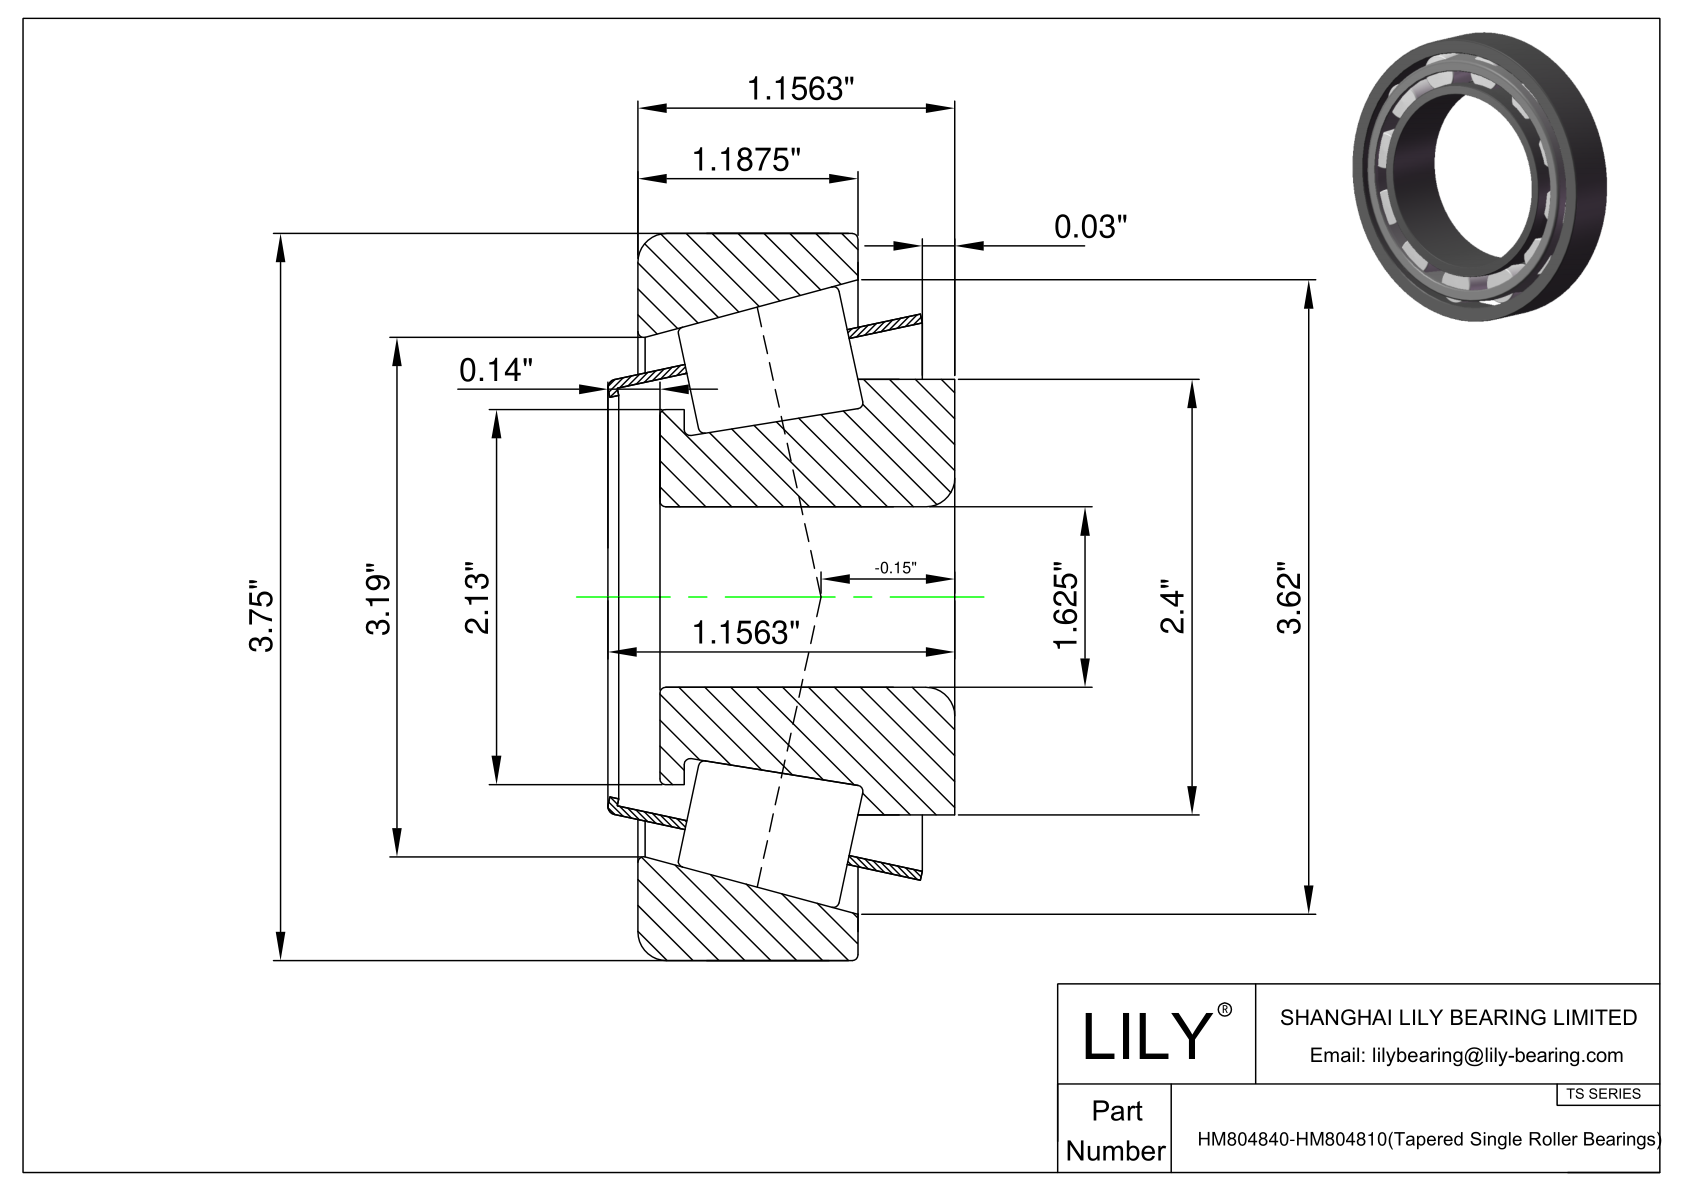 HM804840-HM804810 TS (Tapered Single Roller Bearings) (Imperial) cad drawing